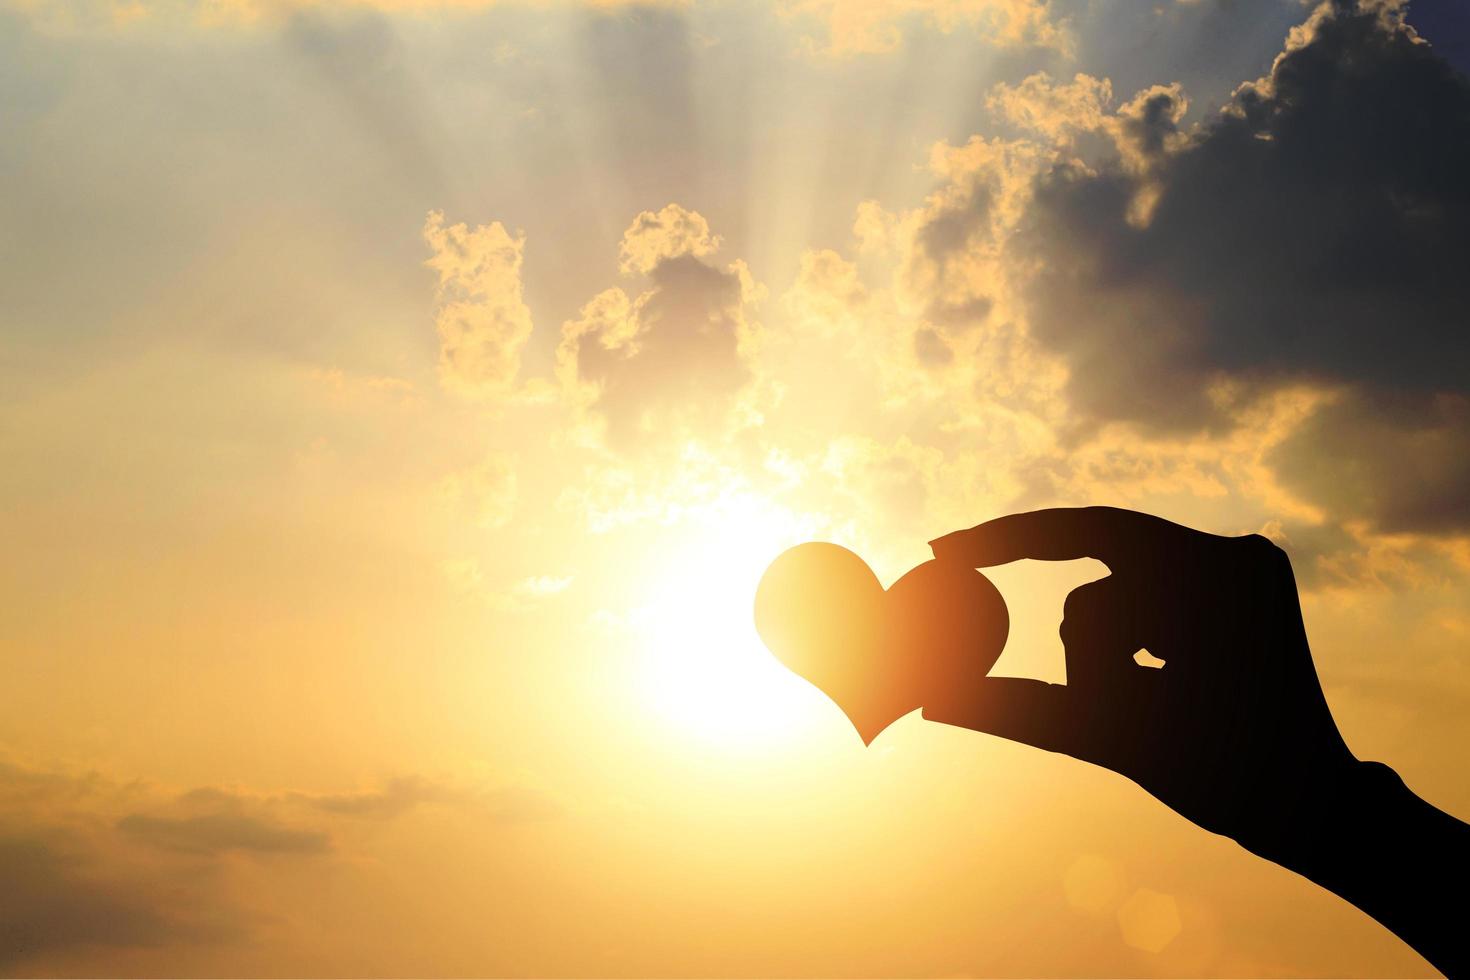 Silhouette hand holding heart against sun light - Love concept - alone - lonly photo